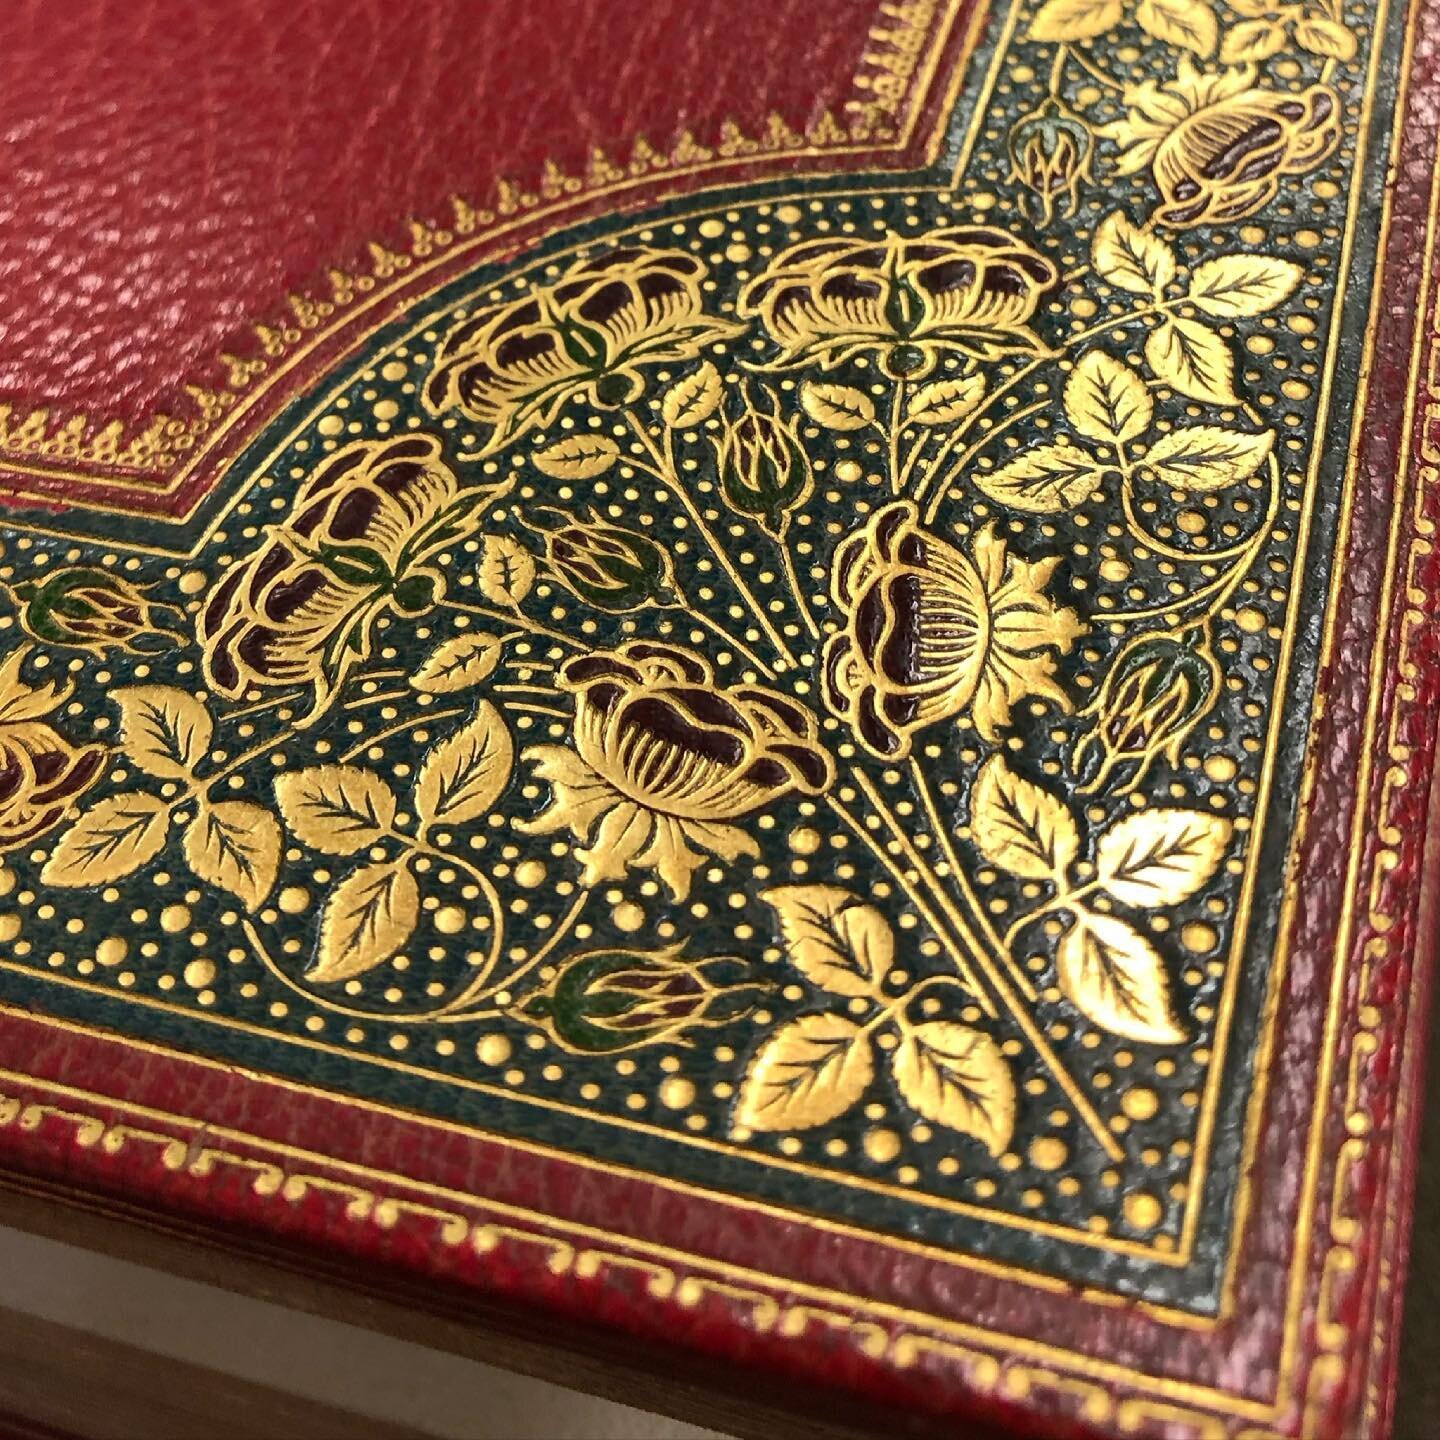 Nothing like a good bit of gold tooling 🤩✨ This is truly a fine binding, executed with inlays of leather of different colors. And it adorns a title that is as much art as it is book: the Kelmscott Chaucer of  the @amhistorymuseum , part of their gra